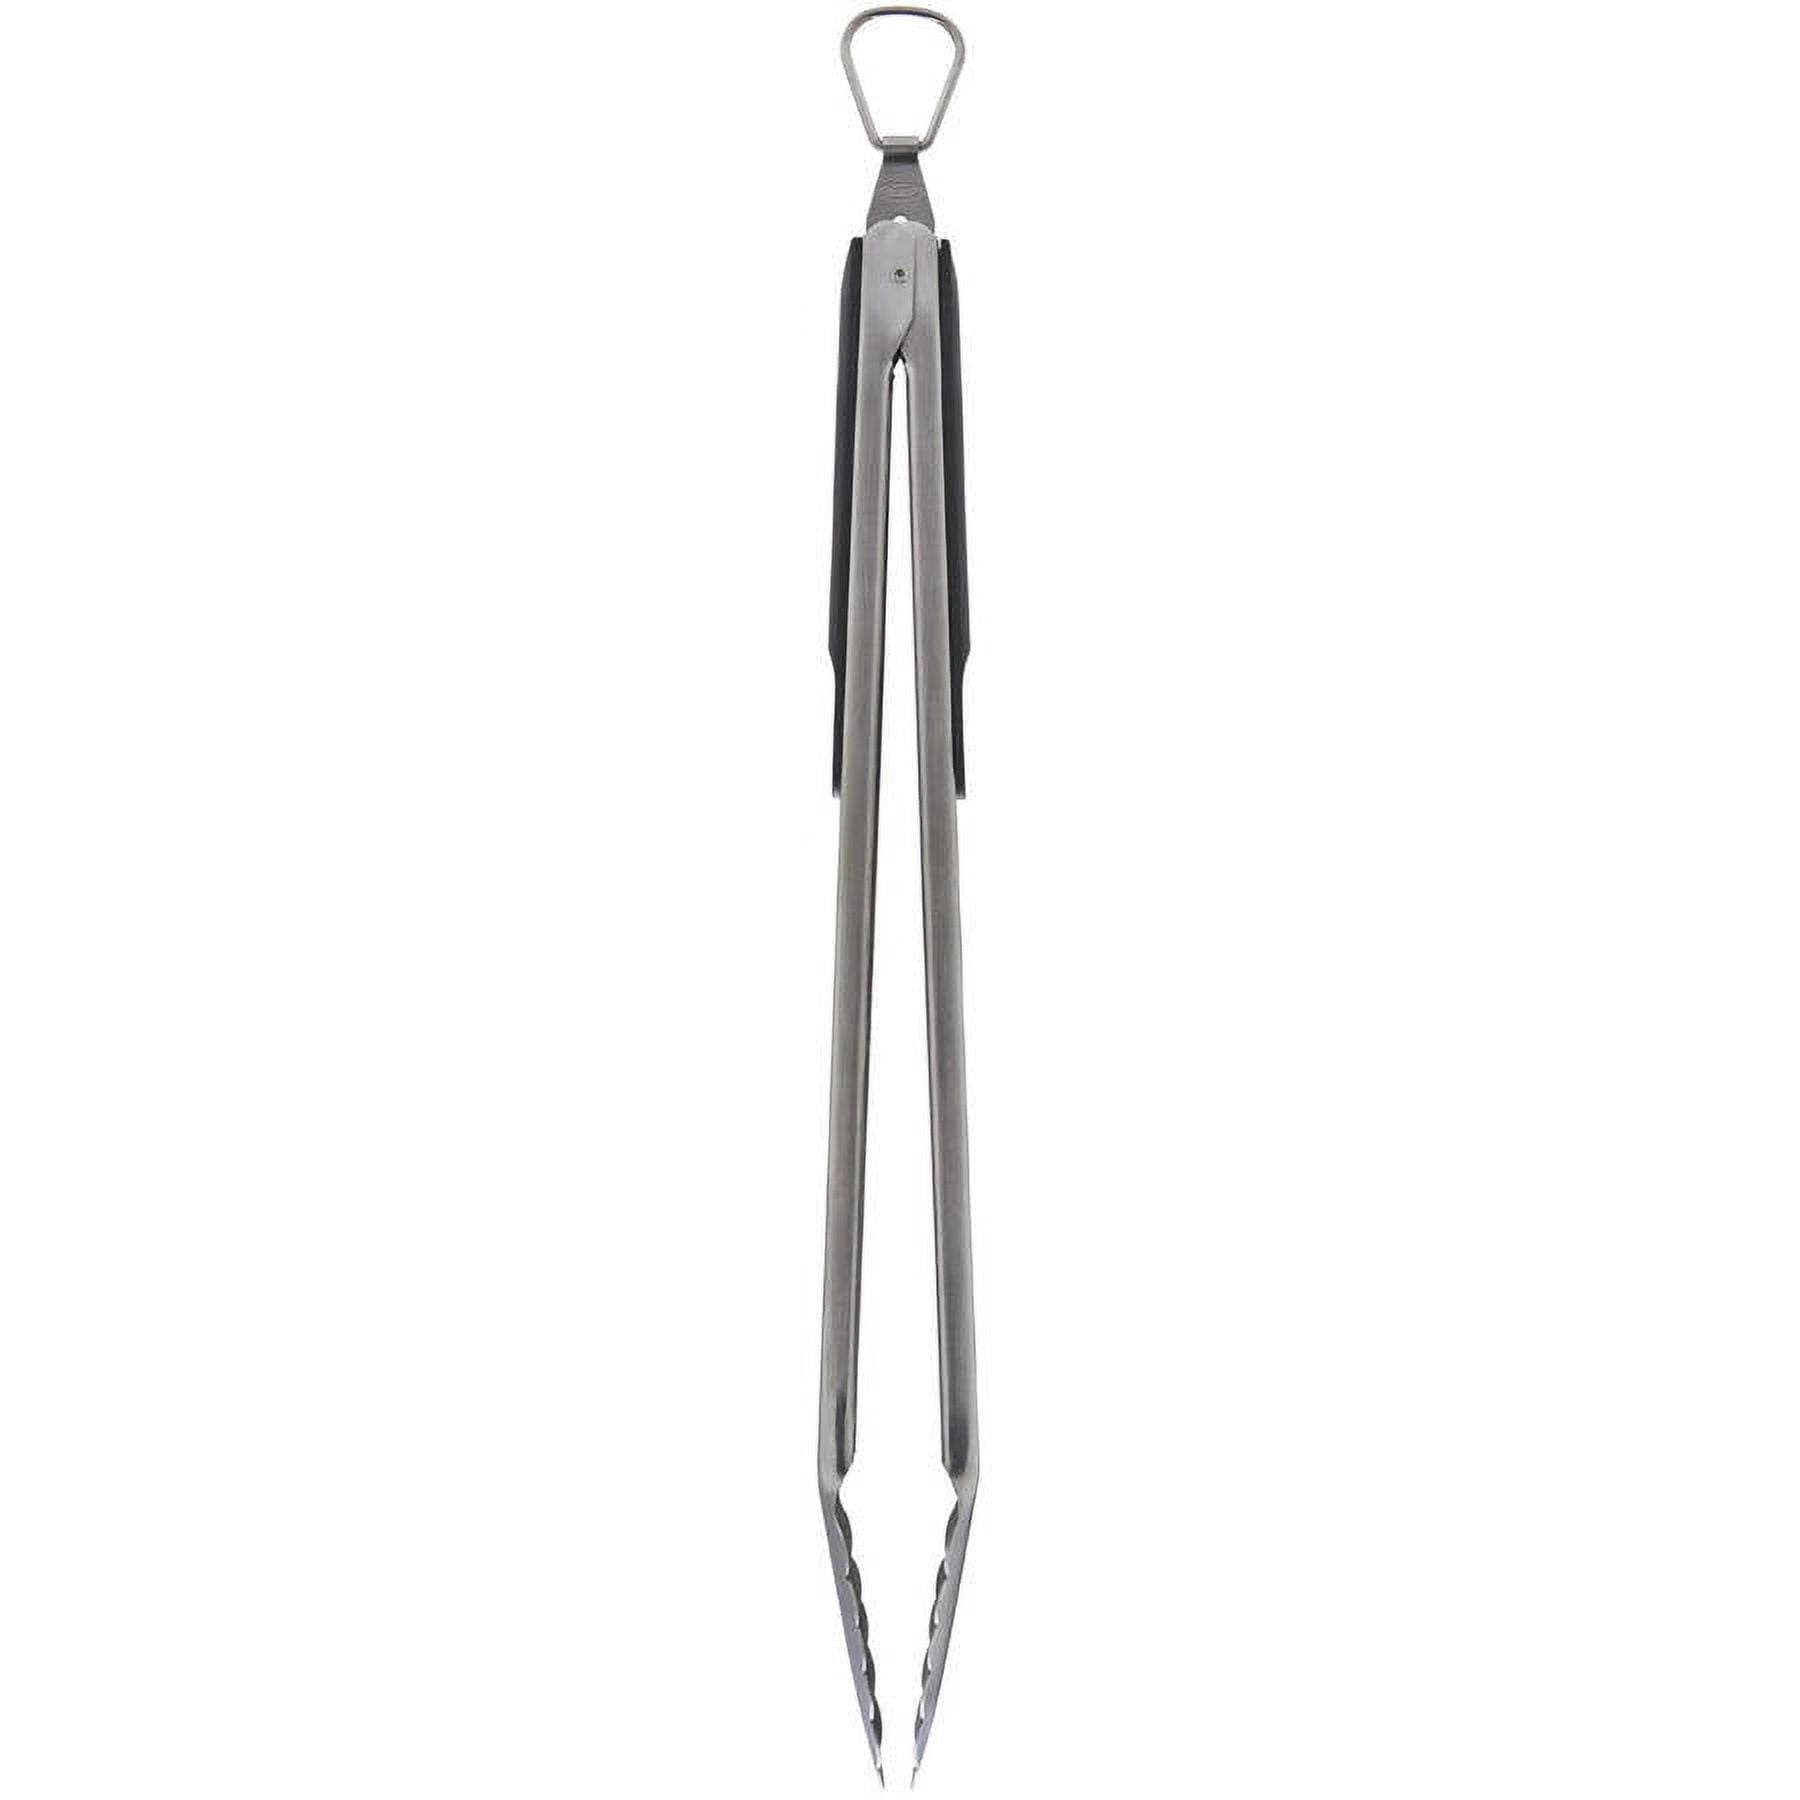 OXO Good Grips 16-Inch Locking Tongs, Silver